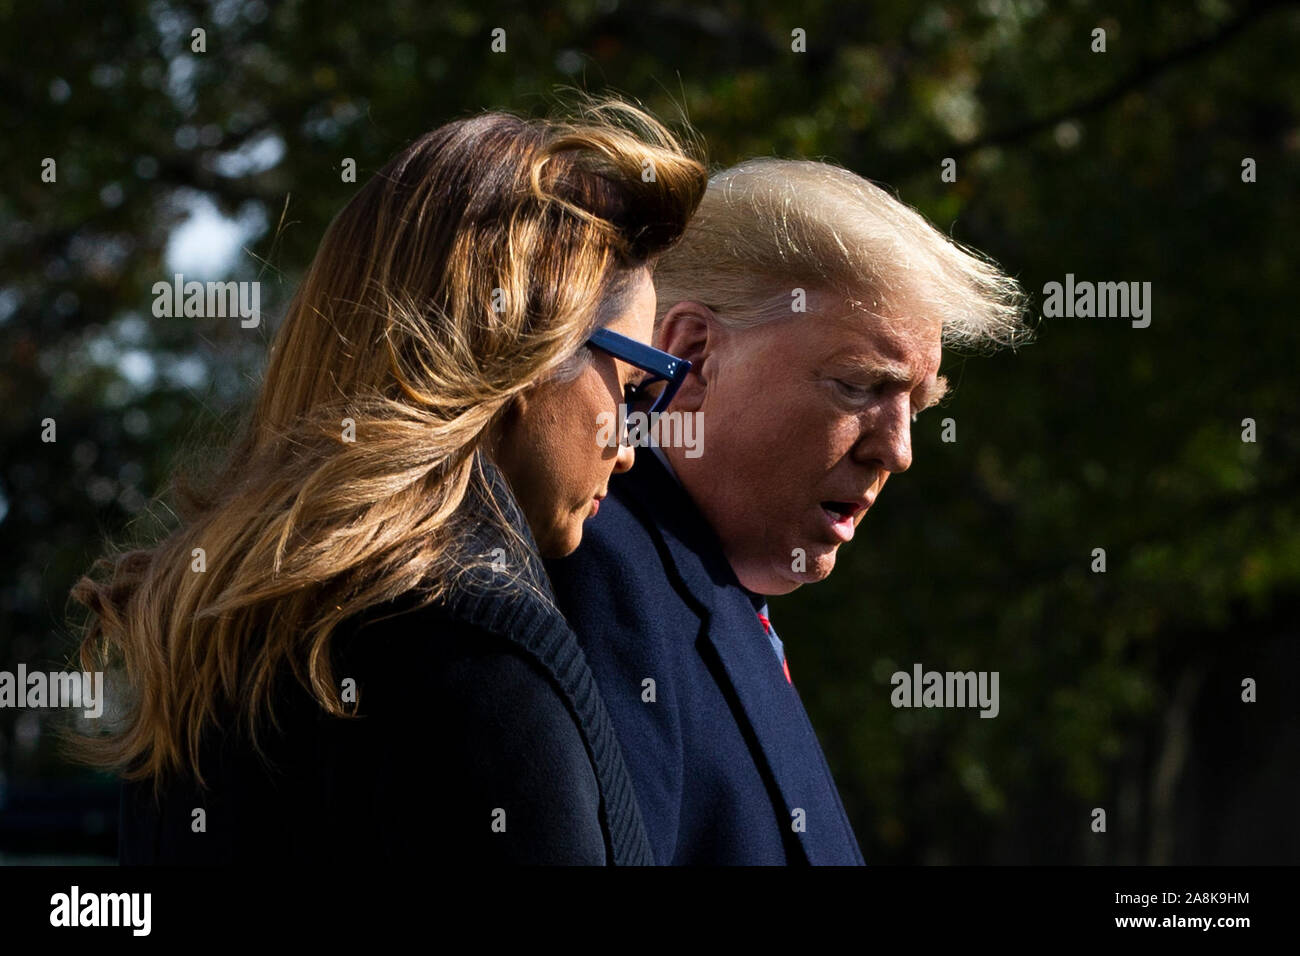 Washington DC, USA. 09th Nov, 2019. US President Donald J. Trump (R) and First Lady Melania Trump (L) walk aross the South Lawn of the White House to depart by Marine One in Washington, DC, USA, 09 November 2019. The President and First Lady will attend a National Collegiate Athletic Association (NCAA) football game between Alabama and Louisiana State University in Tuscaloosa, Alabama; then they will stay in New York City through Veterans Day. Credit: MediaPunch Inc/Alamy Live News Stock Photo